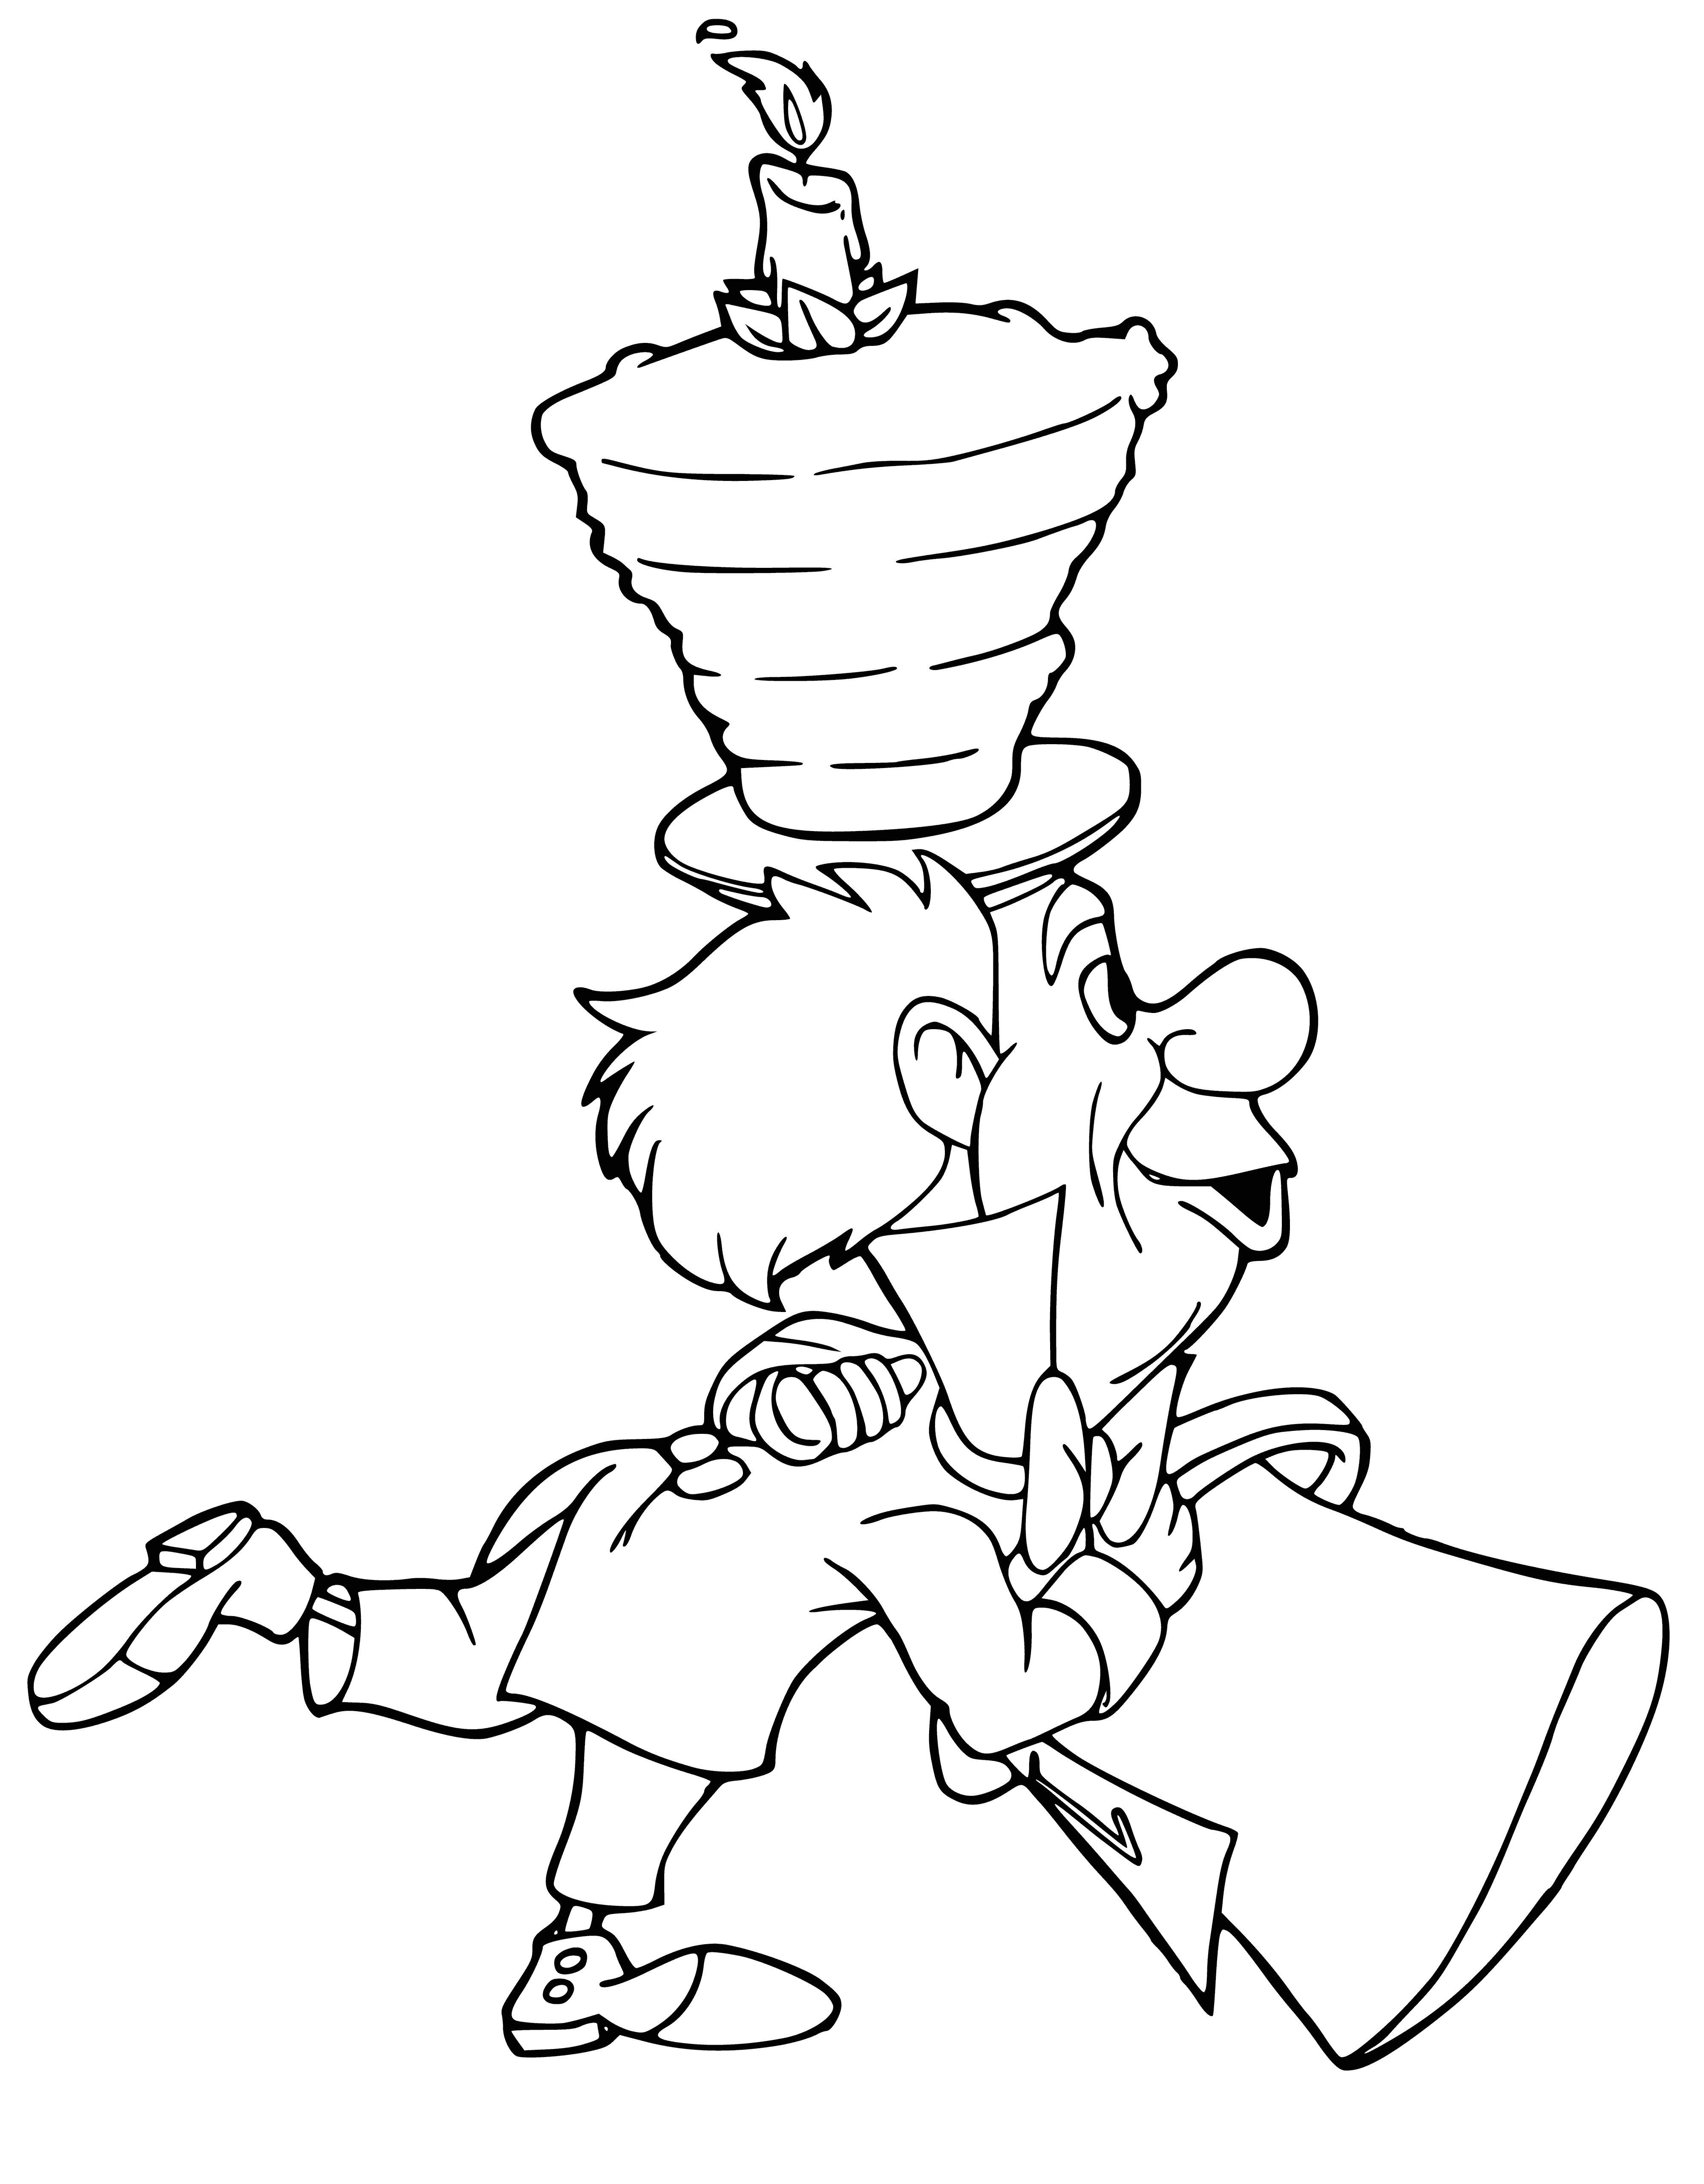 coloring page: Man in bright hat holds teacup & plate of cookies, has wild hair, grinning and crazed looking eyes. Table has tea pot.